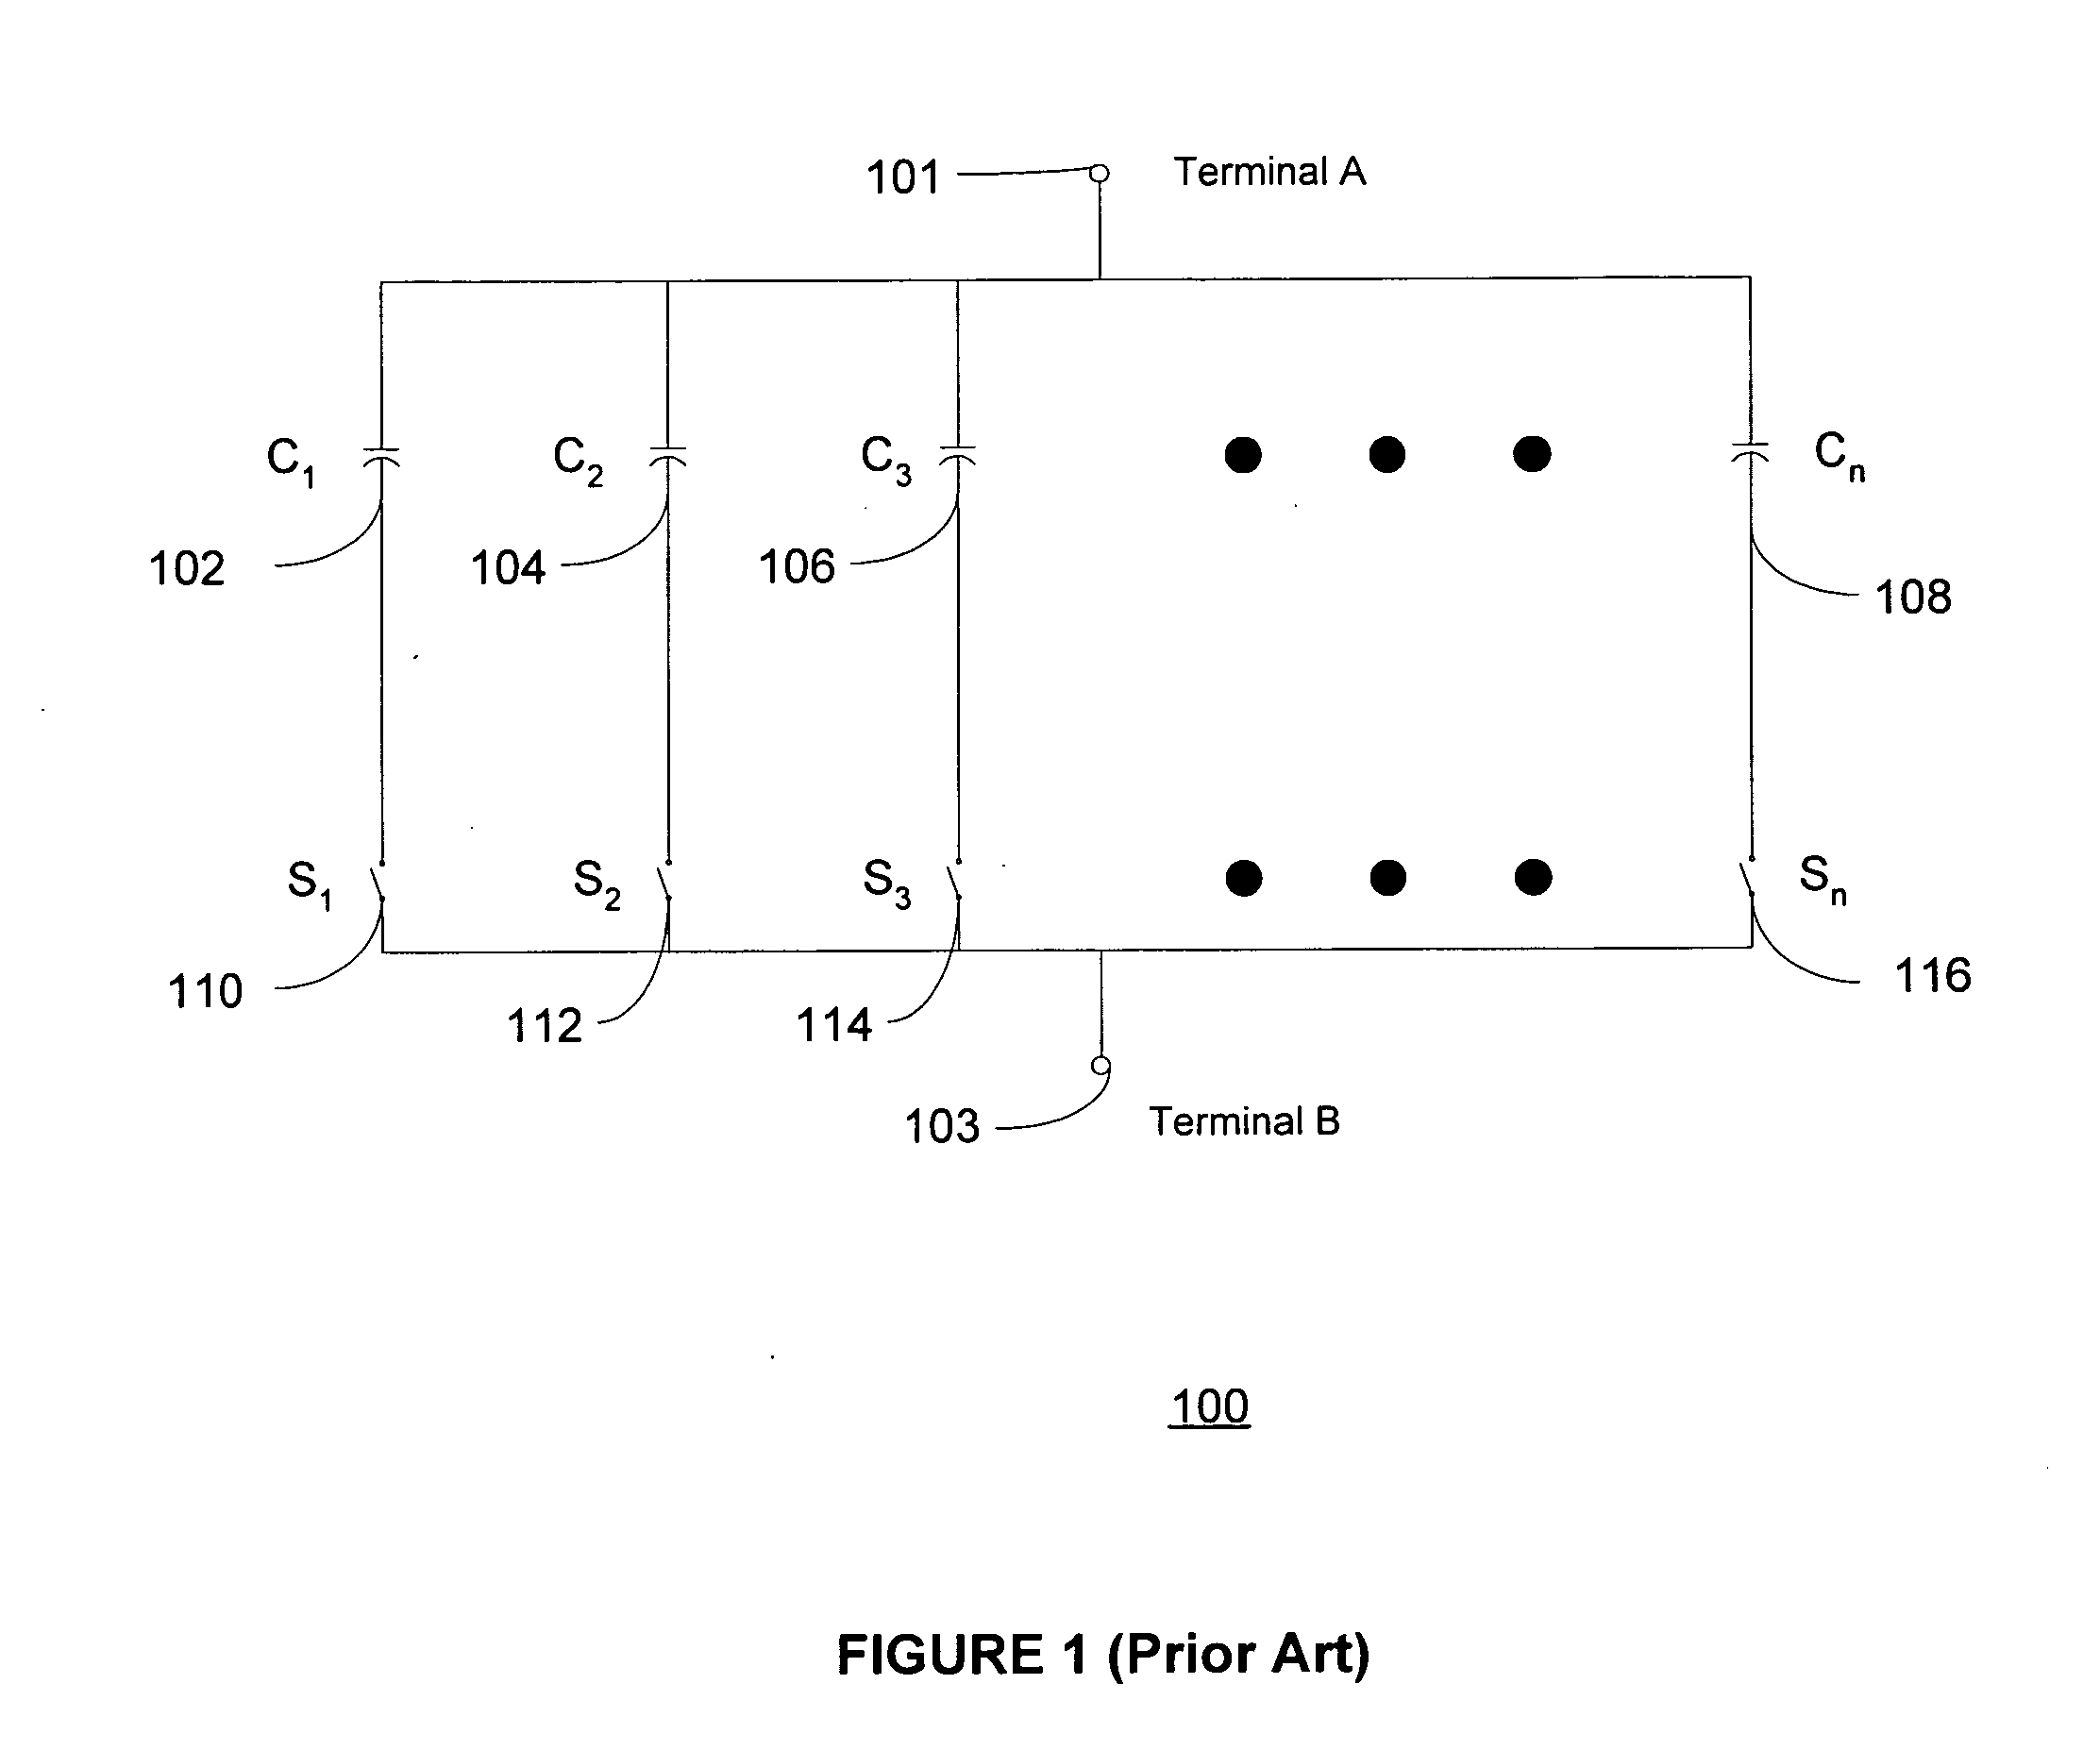 Method and apparatus for use in digitally tuning a capacitor in an integrated circuit device